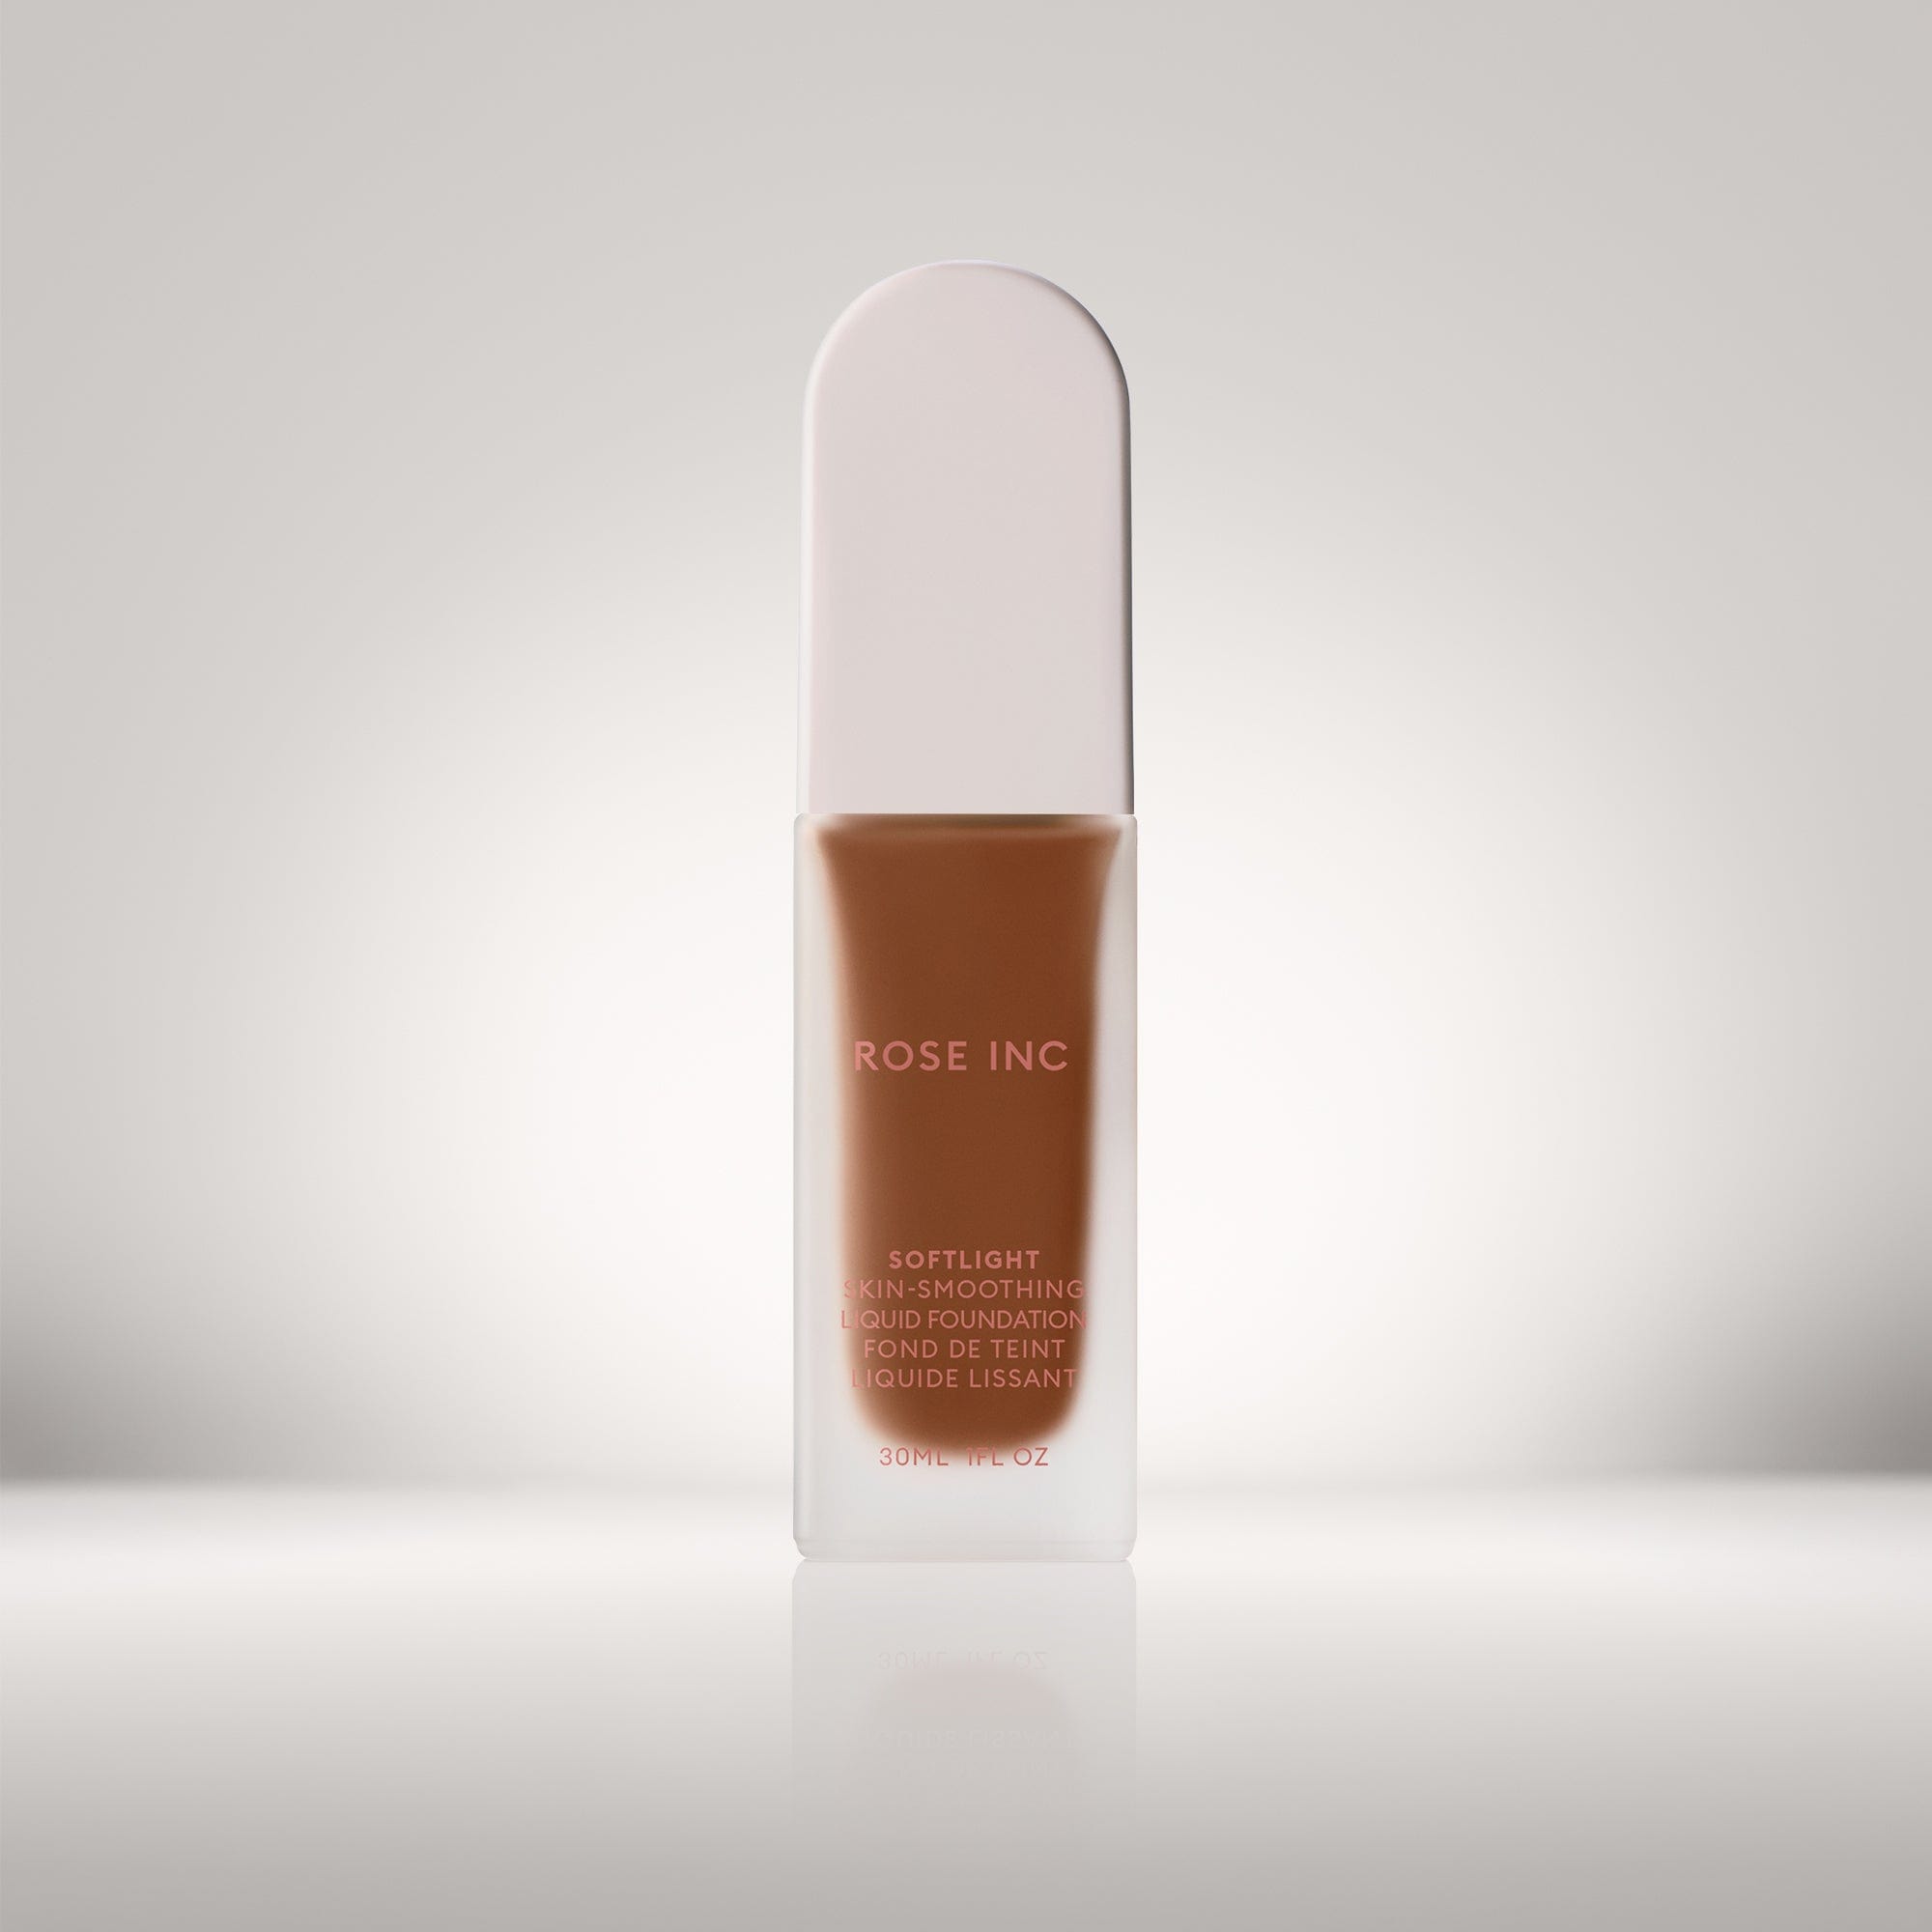 Soldier image of shade 29N in Softlight Smoothing Foundation